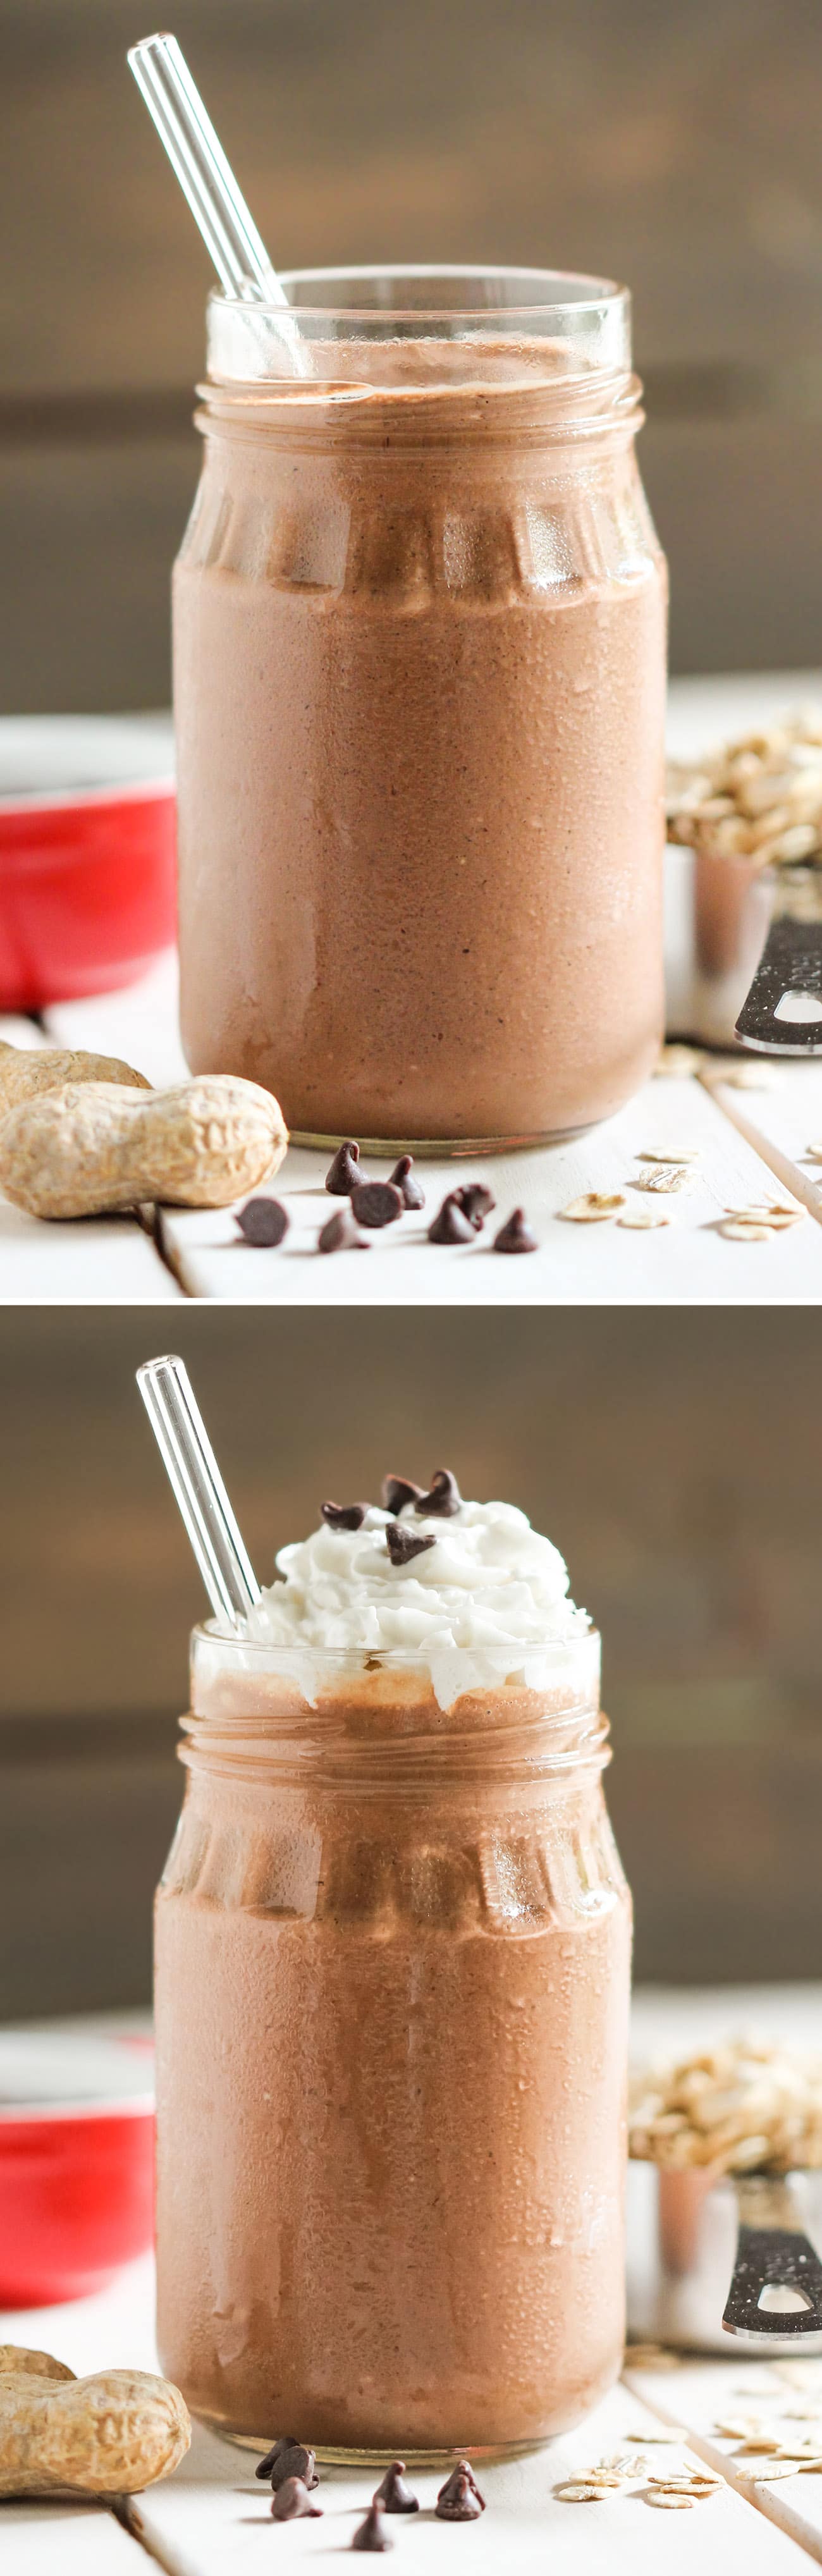 The most delicious, rich, and creamy Healthy Chocolate Peanut Butter Oatmeal Smoothie! Made with cocoa, peanut flour, and rolled oats, you’ll not only get a FLAVOR BOMB of a smoothie, but you’ll get some protein, fiber, antioxidants, vitamins, and minerals too! Healthy Dessert Recipes with sugar free, low calorie, low fat, low carb, high protein, gluten free, dairy free, vegan, and raw options at the Desserts With Benefits Blog (www.DessertsWithBenefits.com)